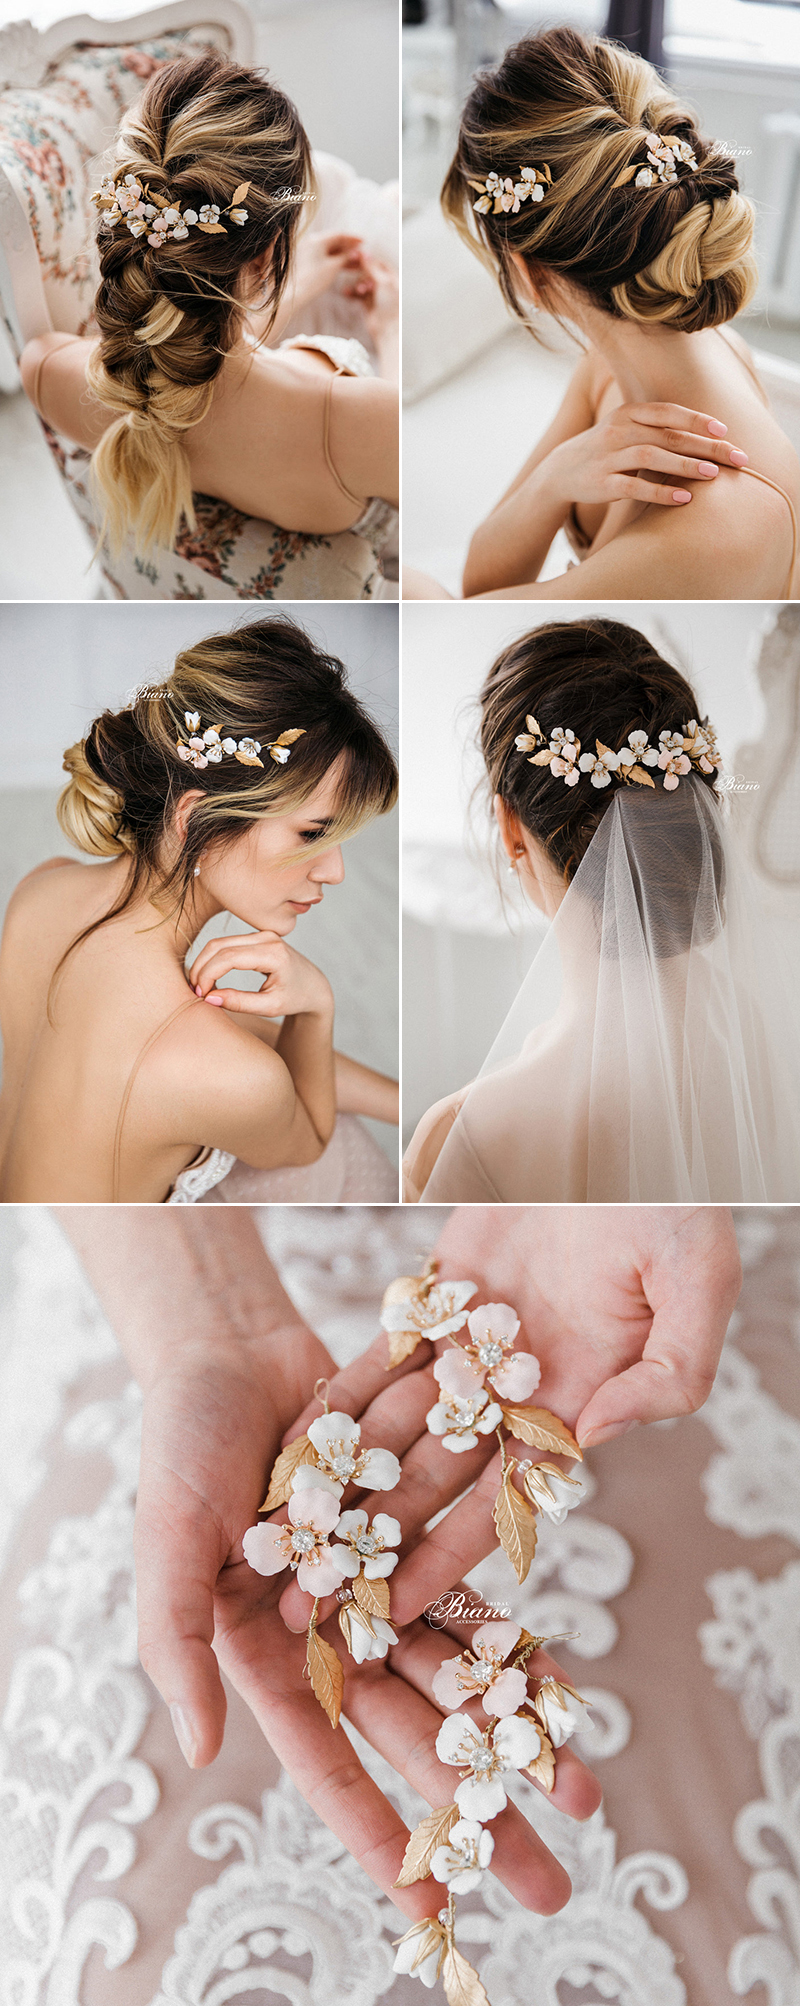 Seven Dos and Don'ts of Wearing a Hair Accessory on Your Wedding Day